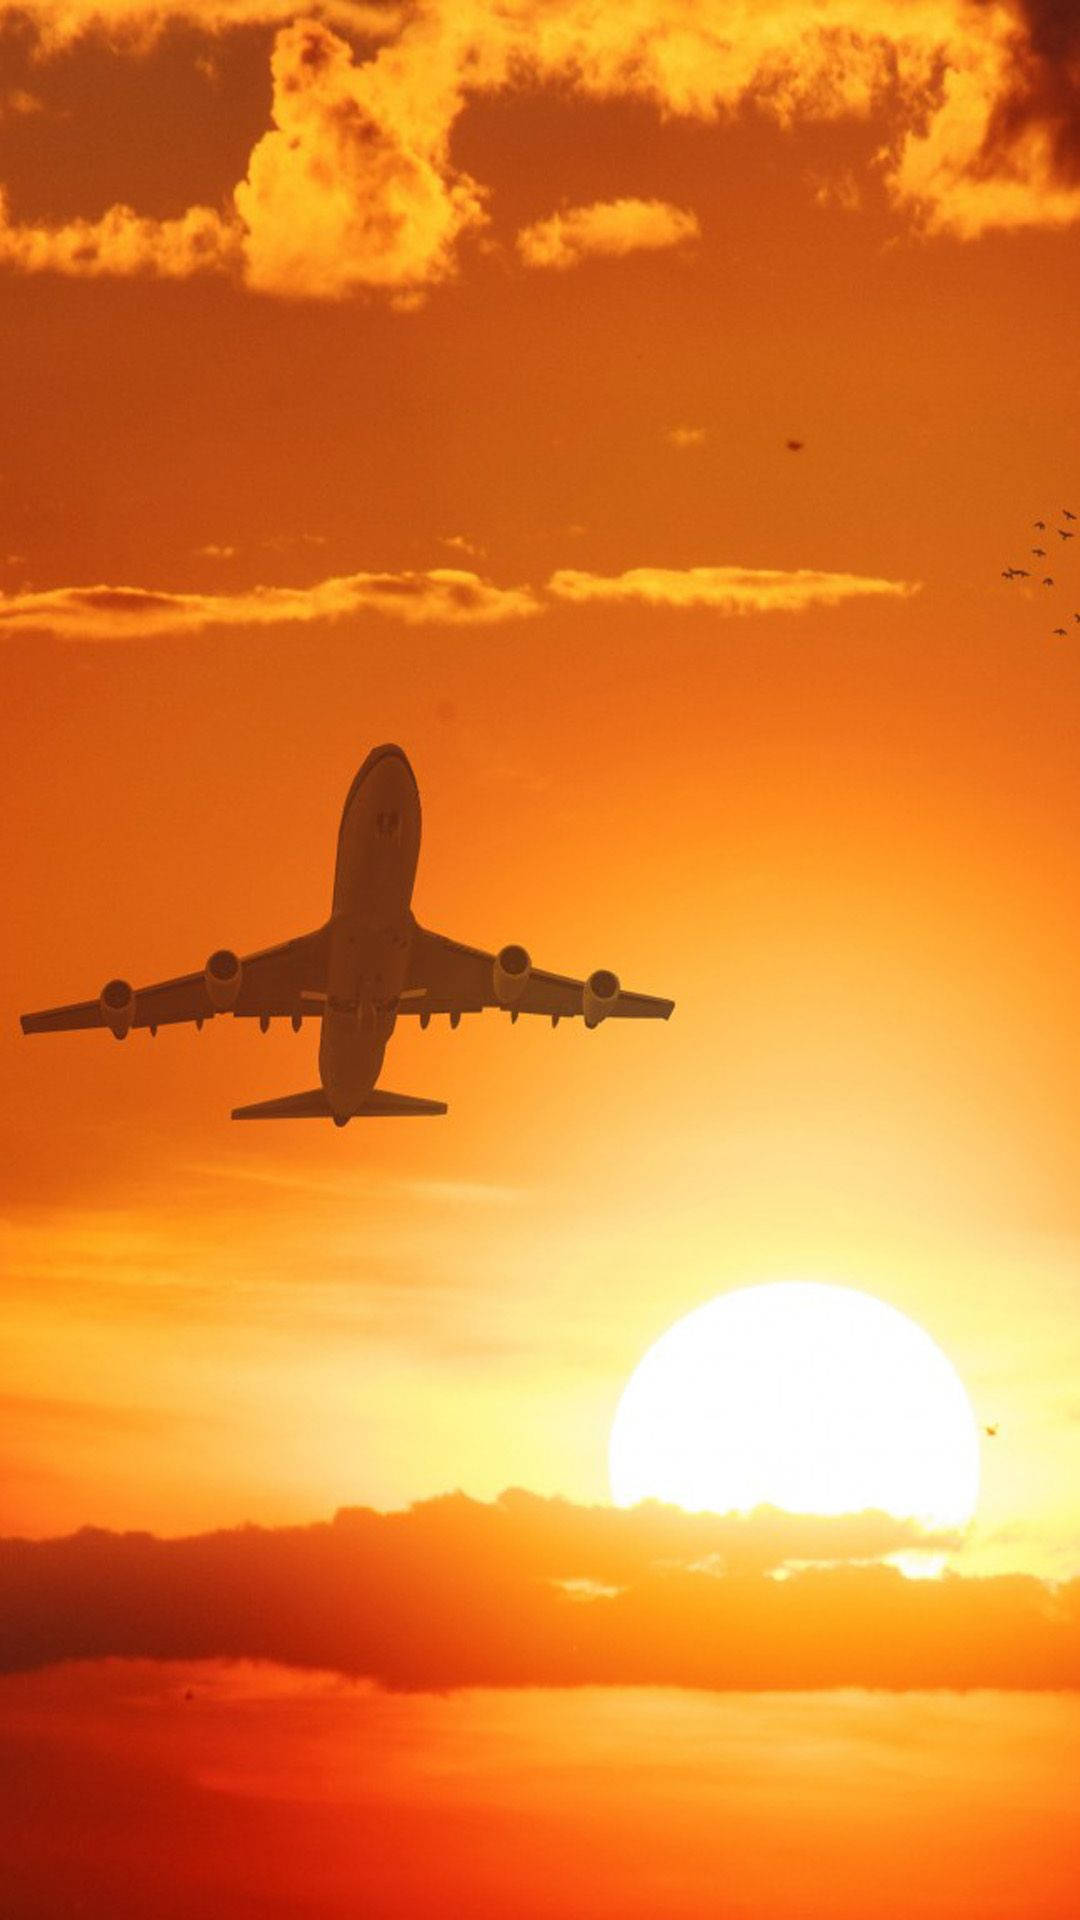 Sunset Silhouette Of Airplane Android Wallpaper